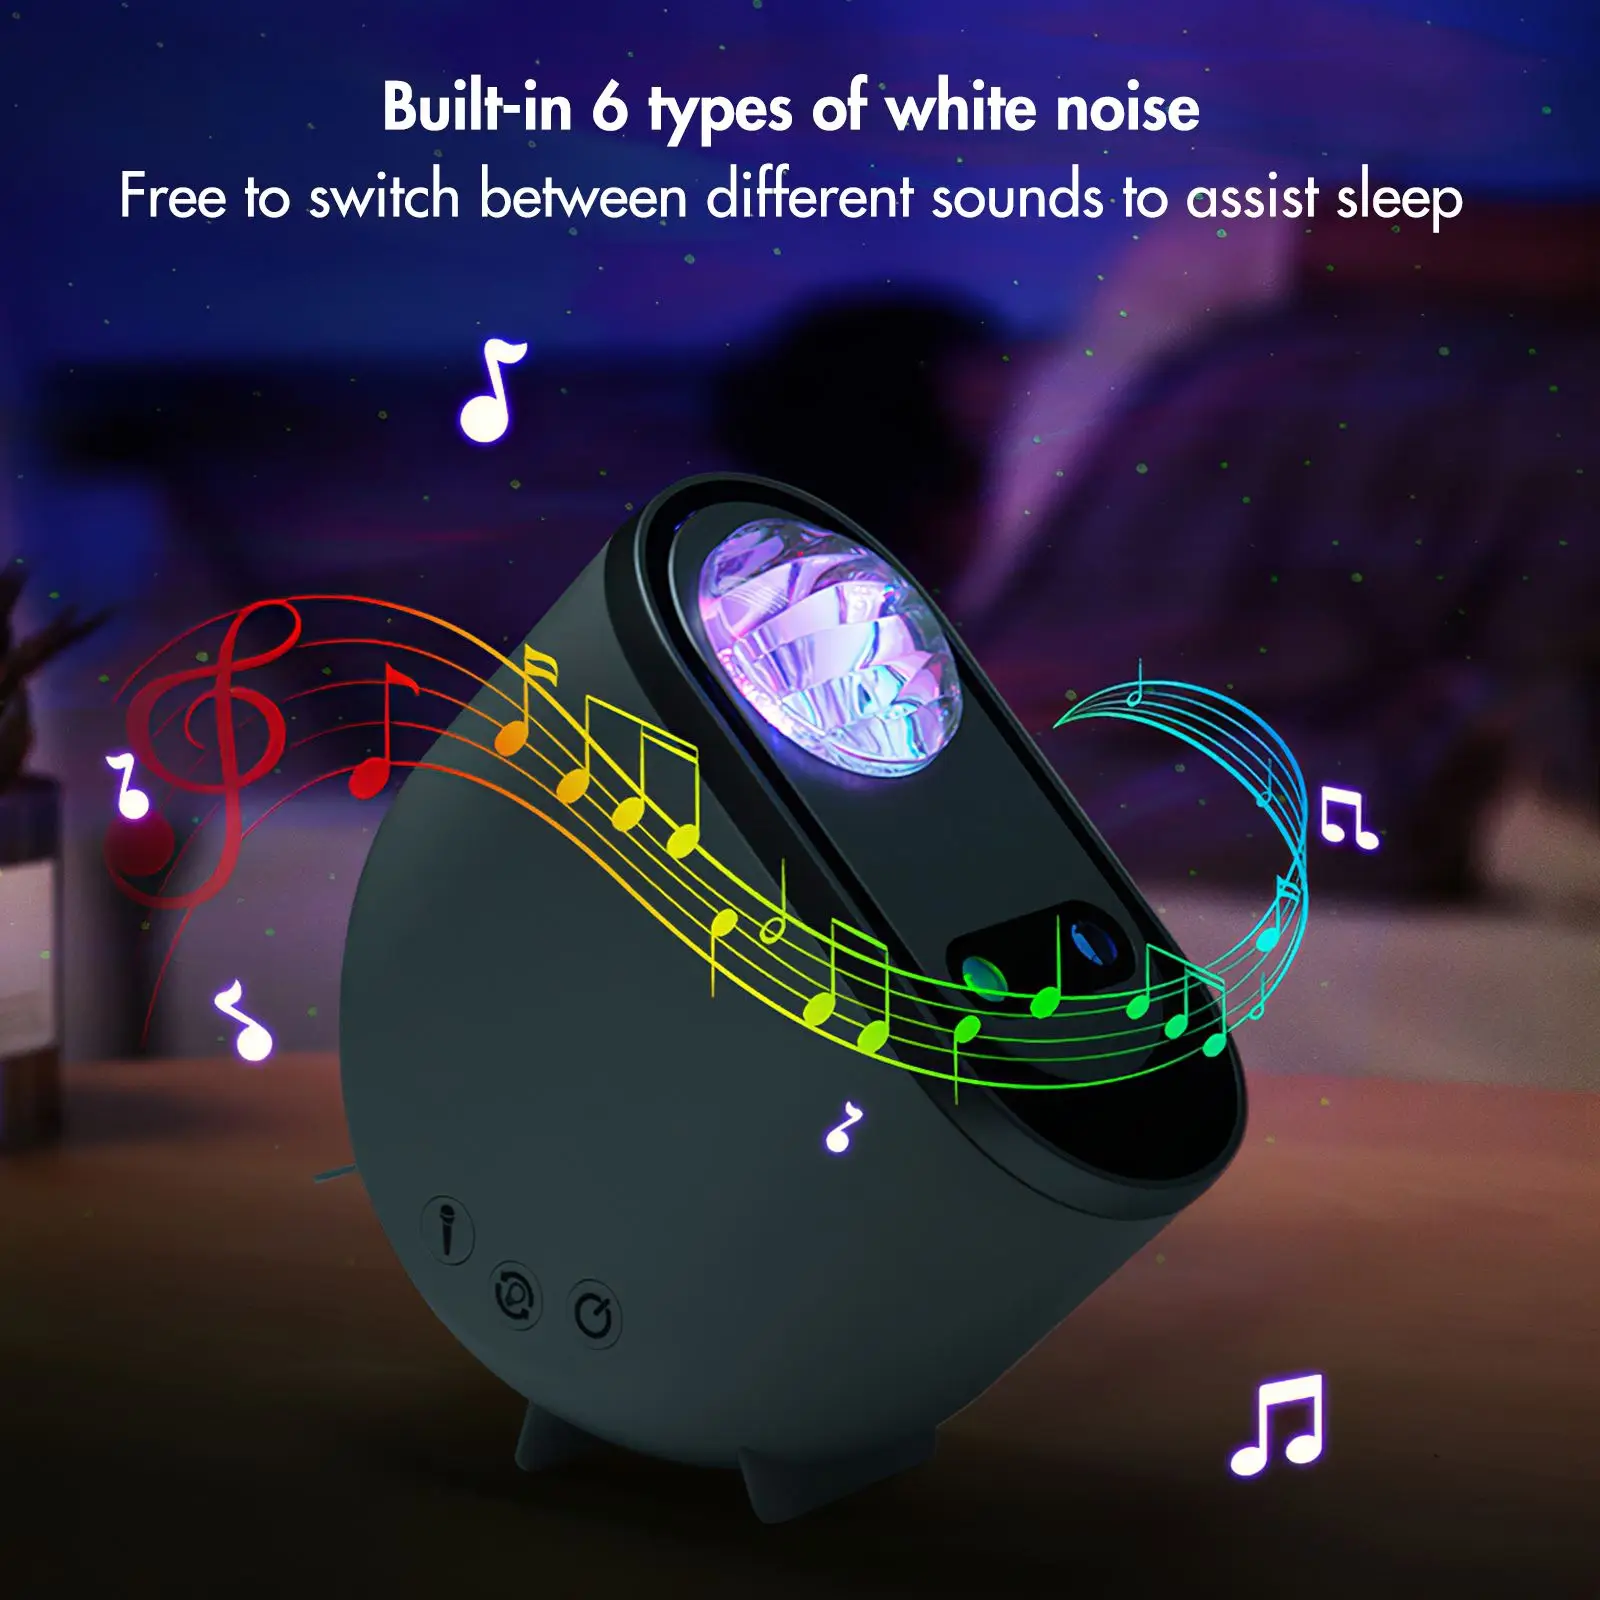 Adjustable Starlight Projectors With Remote Control Timing Function Atmosphere Ceiling Night Light Decoration Luminaires Gift led light with 12v2835 waterproof rgb blister set remote control living room decoration background atmosphere 5m 10m